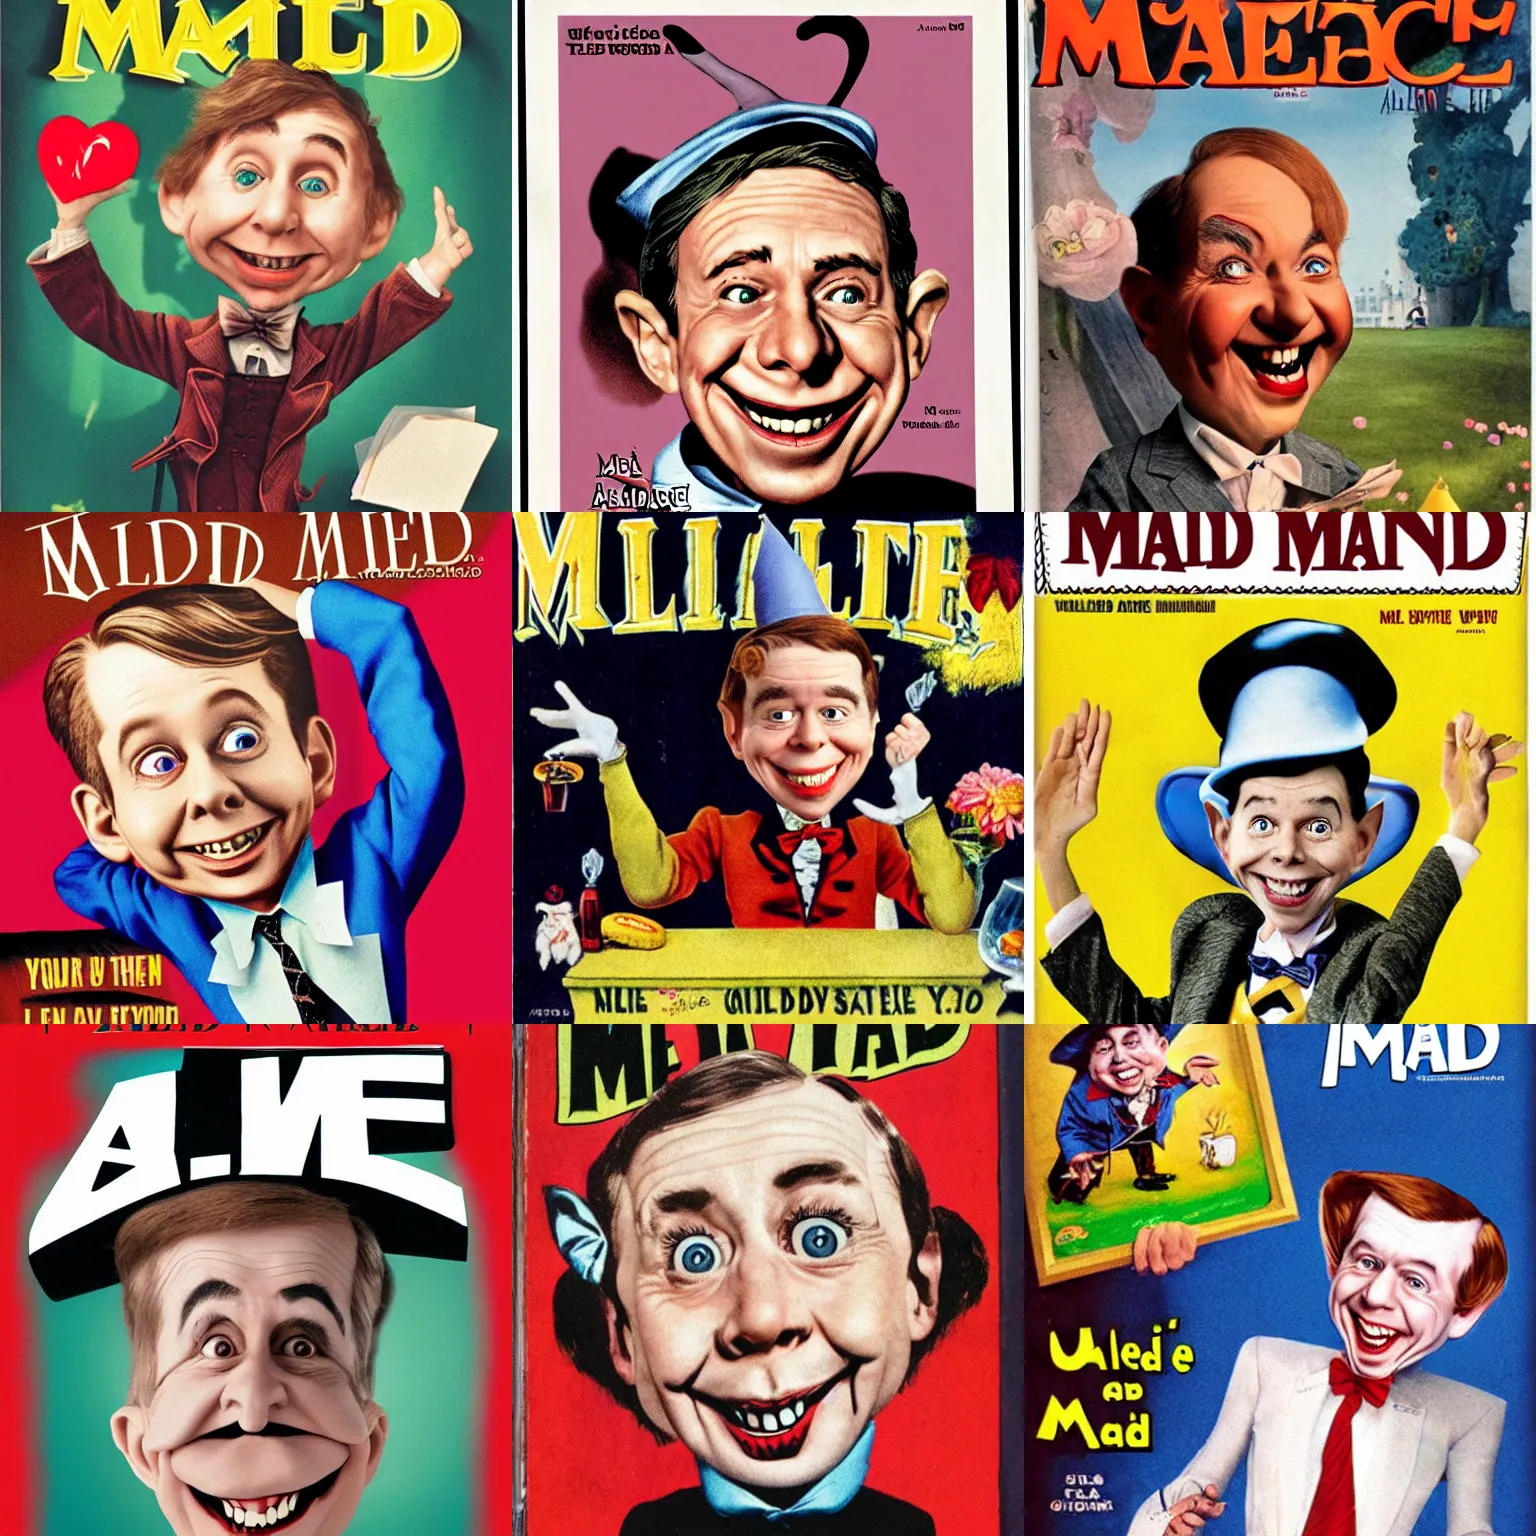 Prompt: alice in wonderland as alfred e neuman on the cover of mad magazine